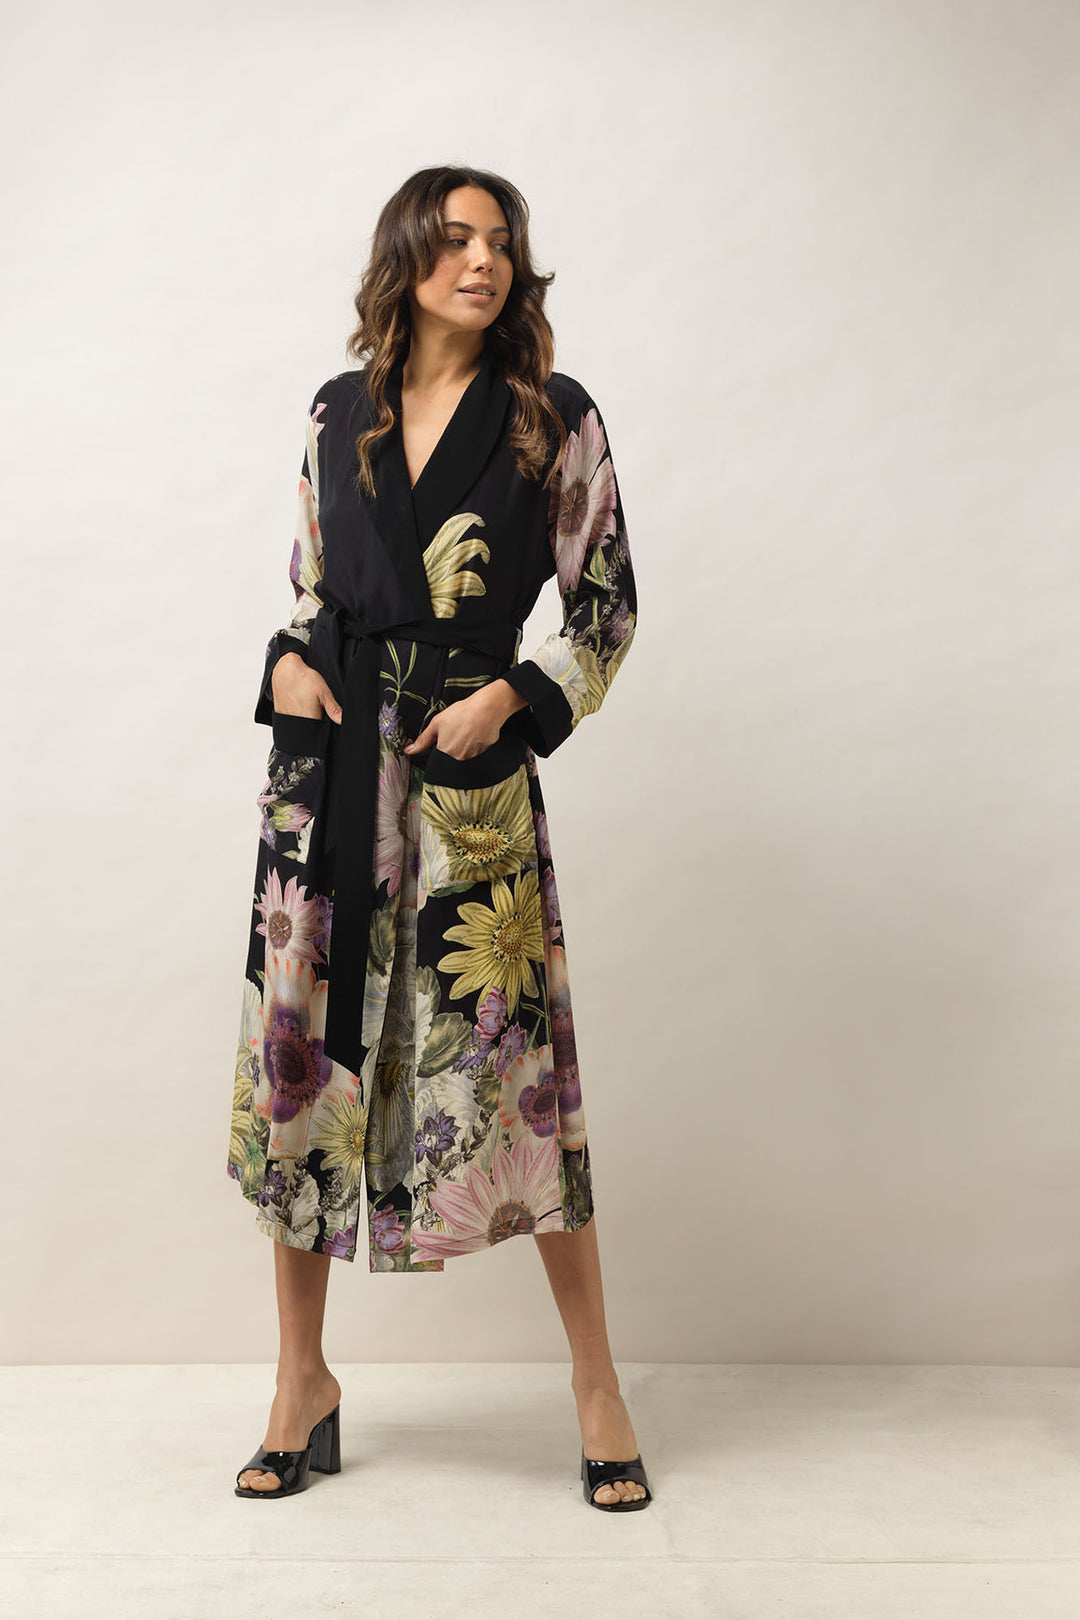 ladies crepe dressing gown with a floral daisy print on a black background by One Hundred Stars